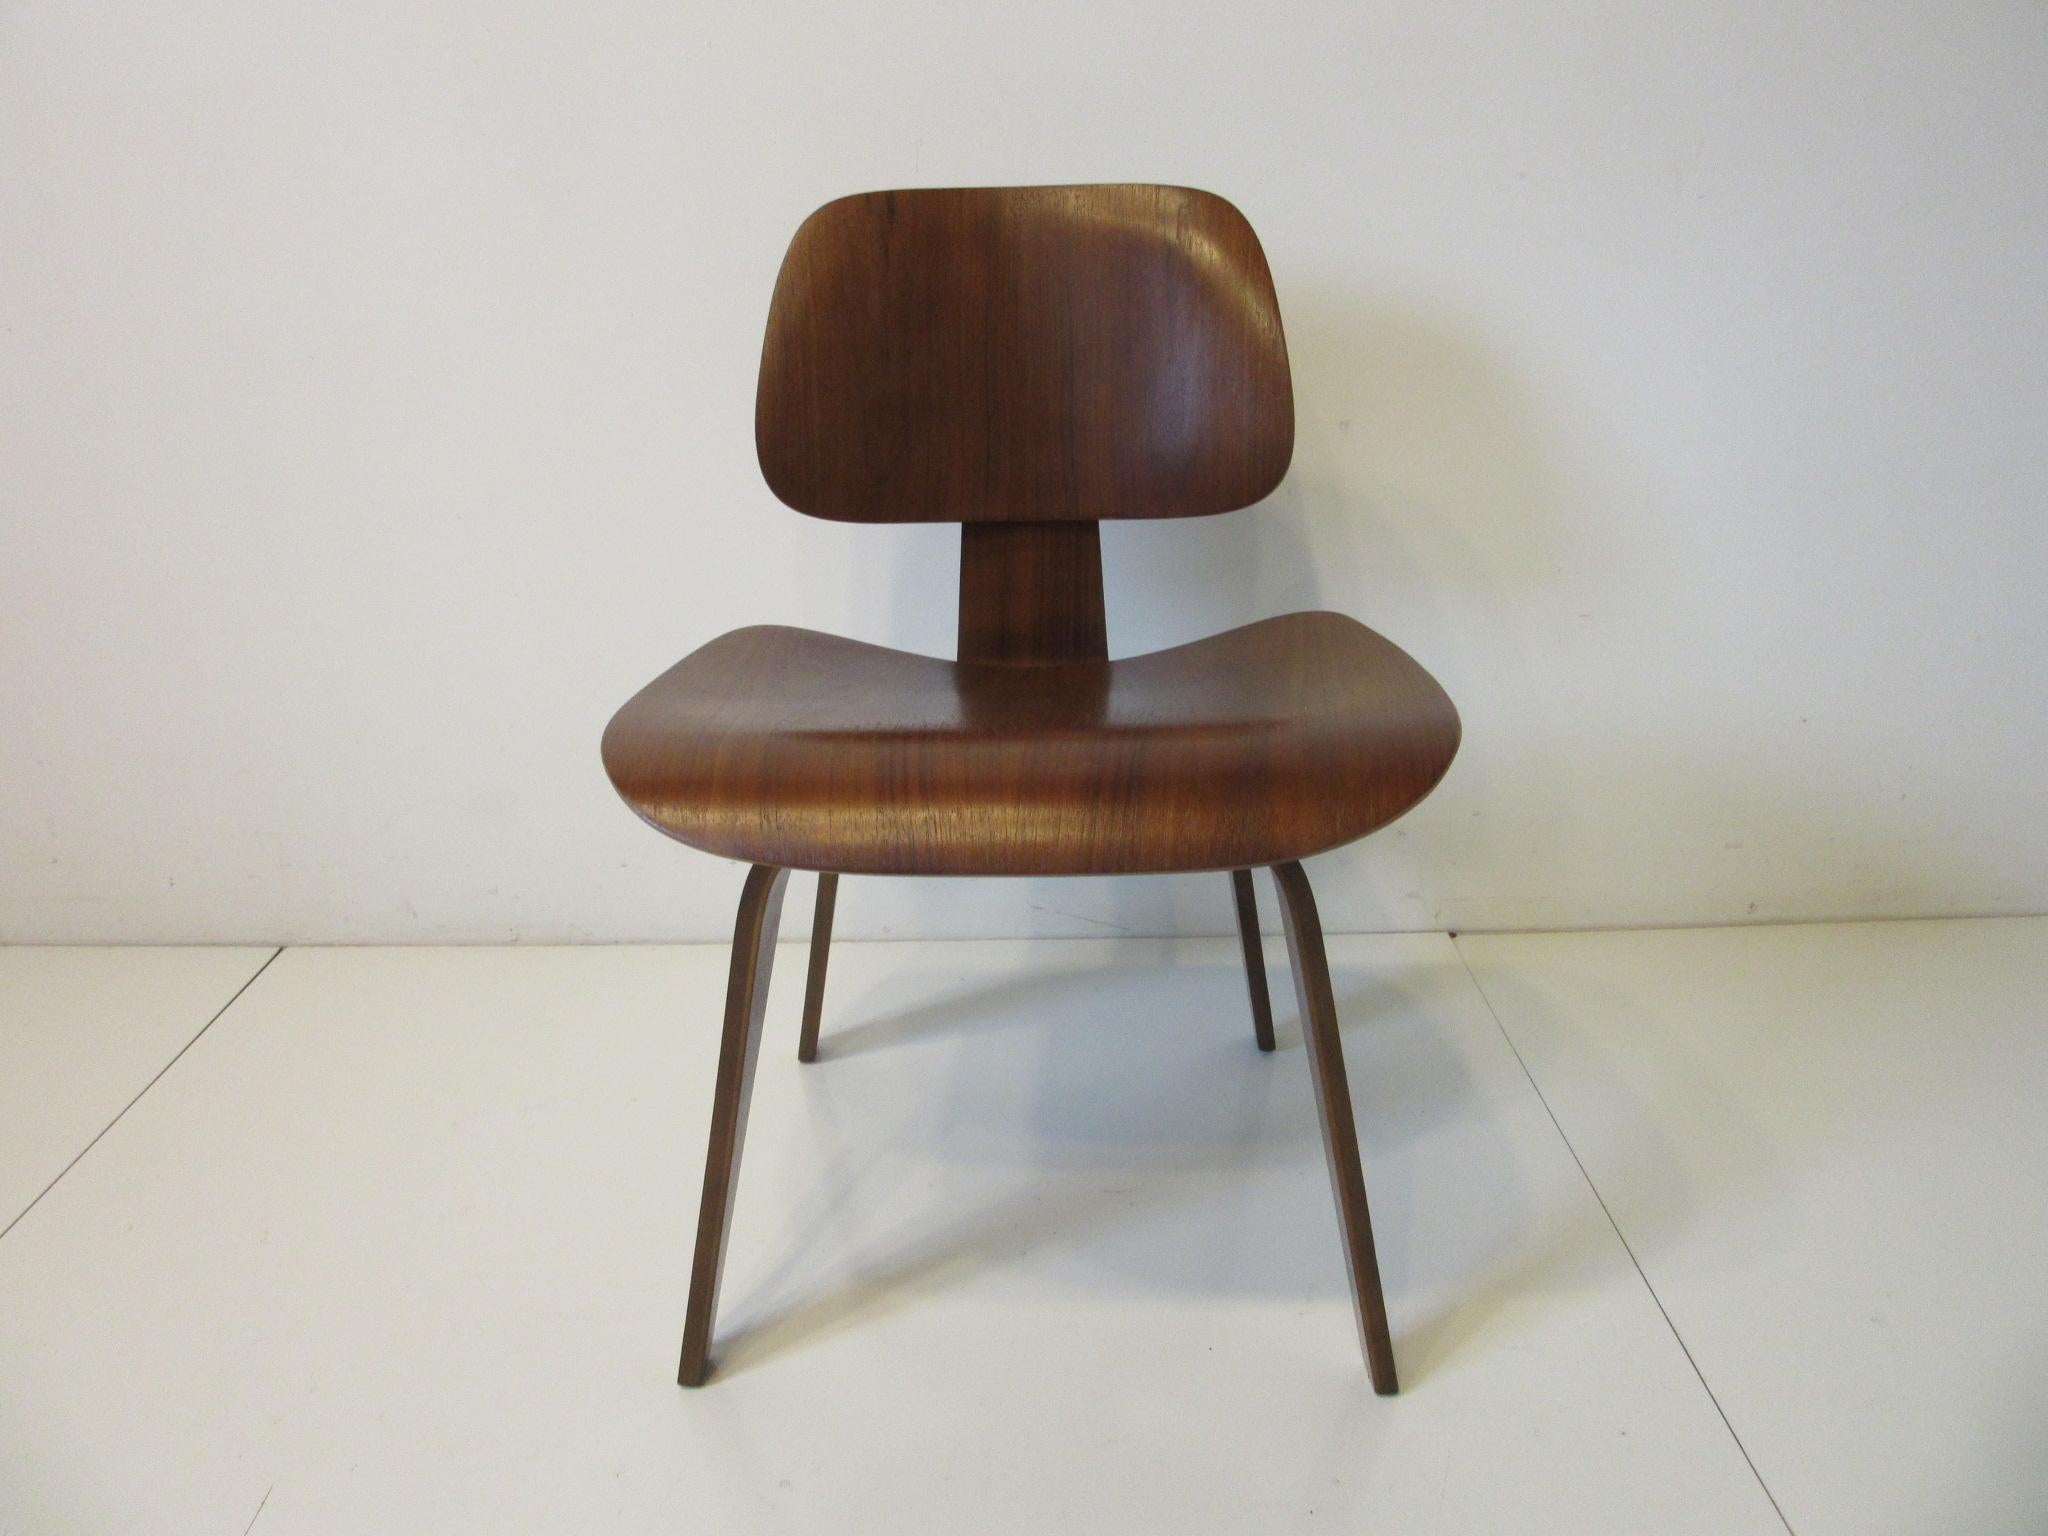 A very early nicely grained walnut DCW sculptural side chair designed by the husband and the wife team of Charles and Ray Eames. This iconic piece of mid century furniture history produced in the 1950's still feels as fresh today as it did then.